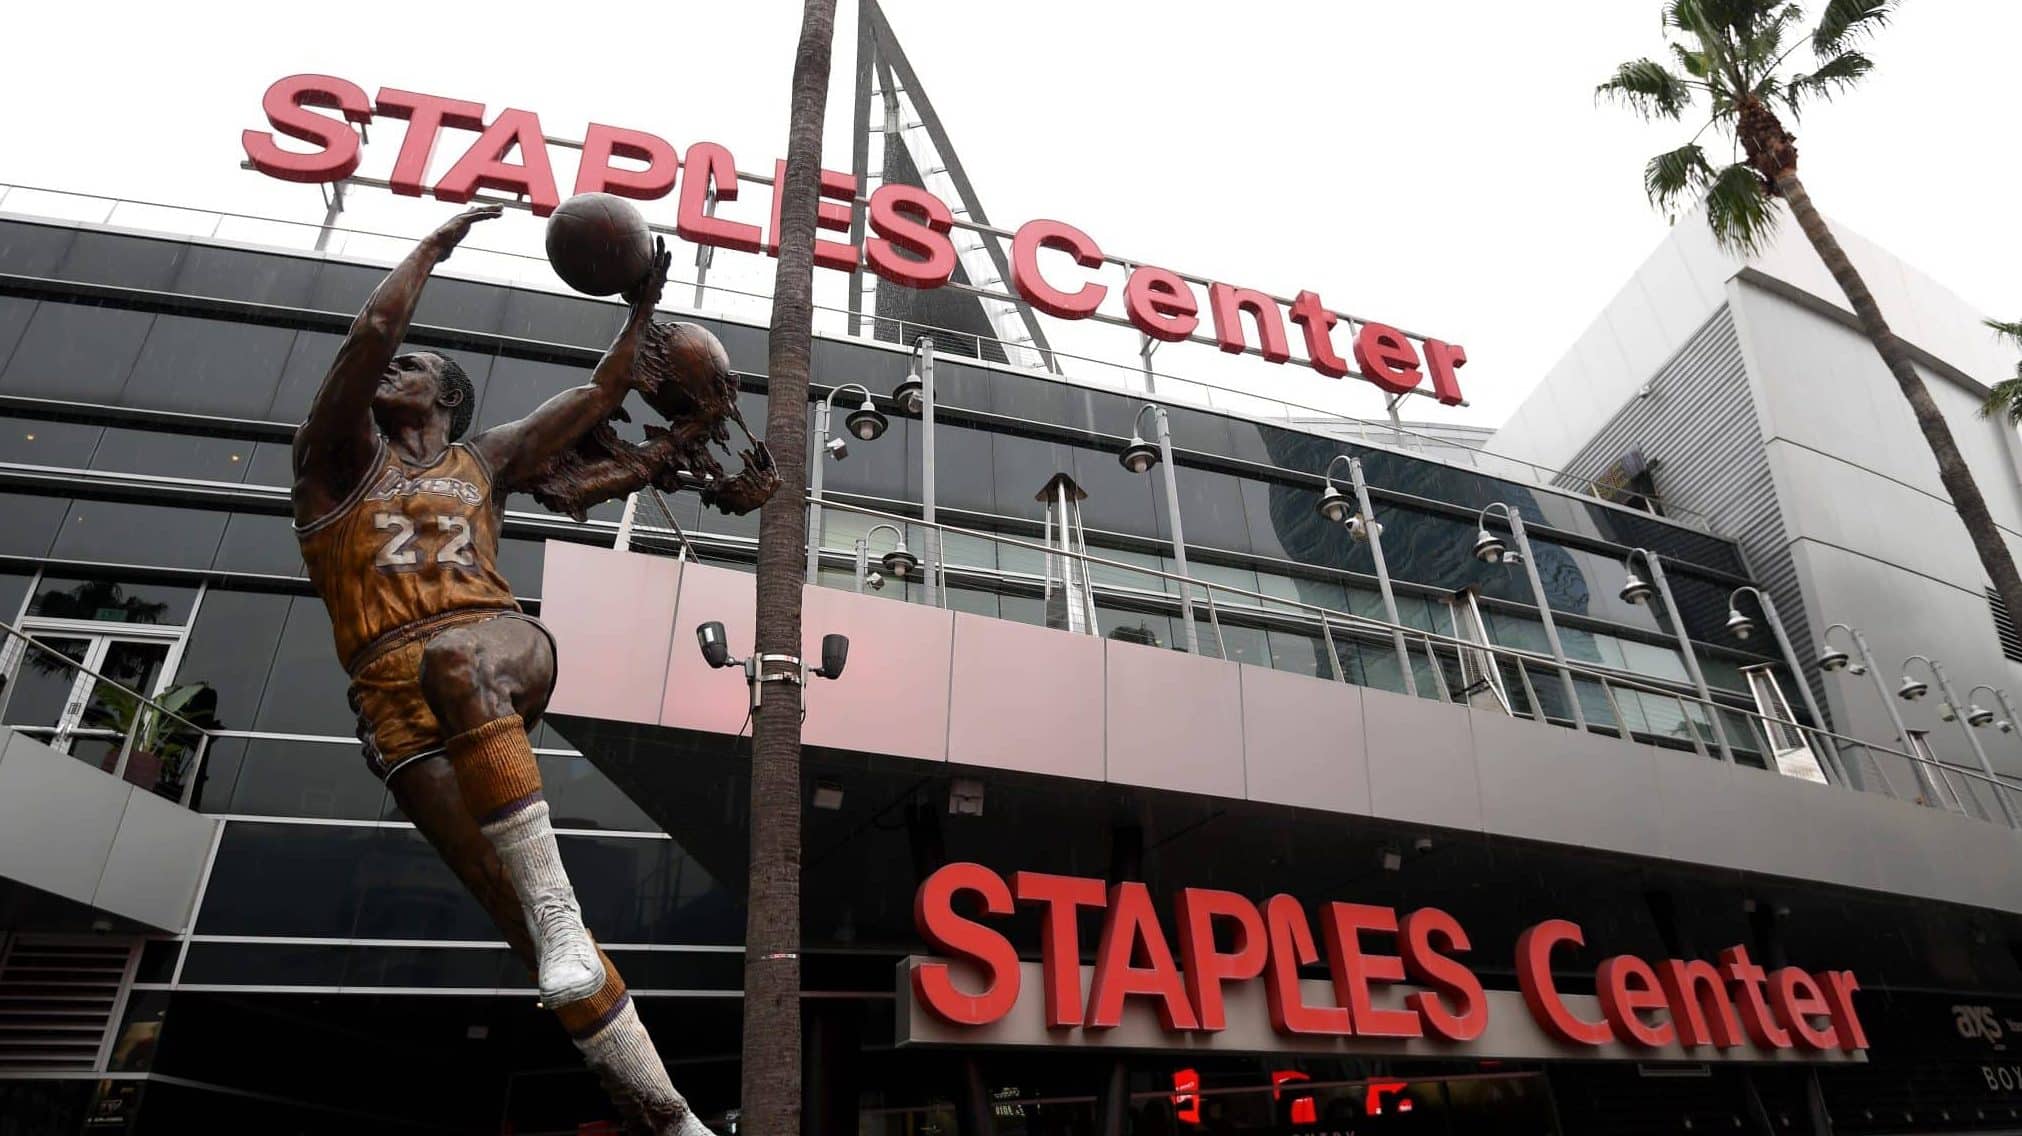 LOS ANGELES, CALIFORNIA - MARCH 12: Exterior of Staples Center after both the NHL and NBA postpone seasons due to corona virus concerns at Staples Center on March 12, 2020 in Los Angeles, California.